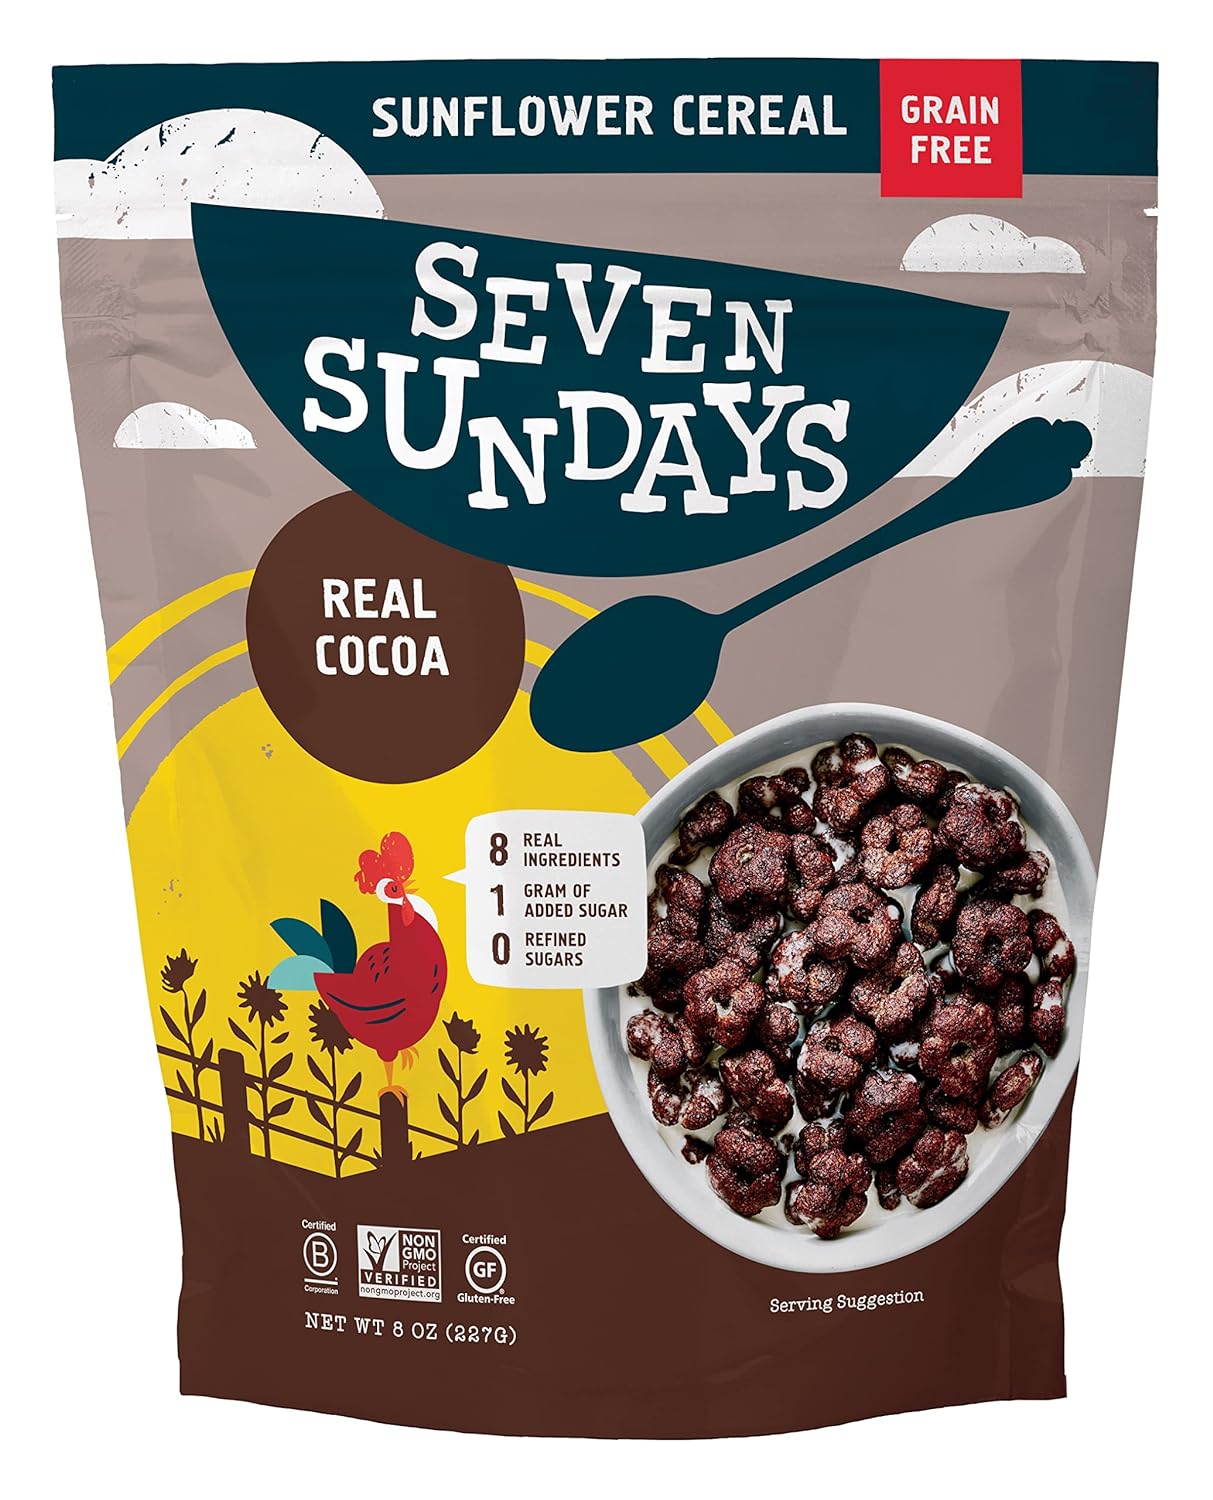 Seven Sundays Sunflower Cereal, Real Cocoa